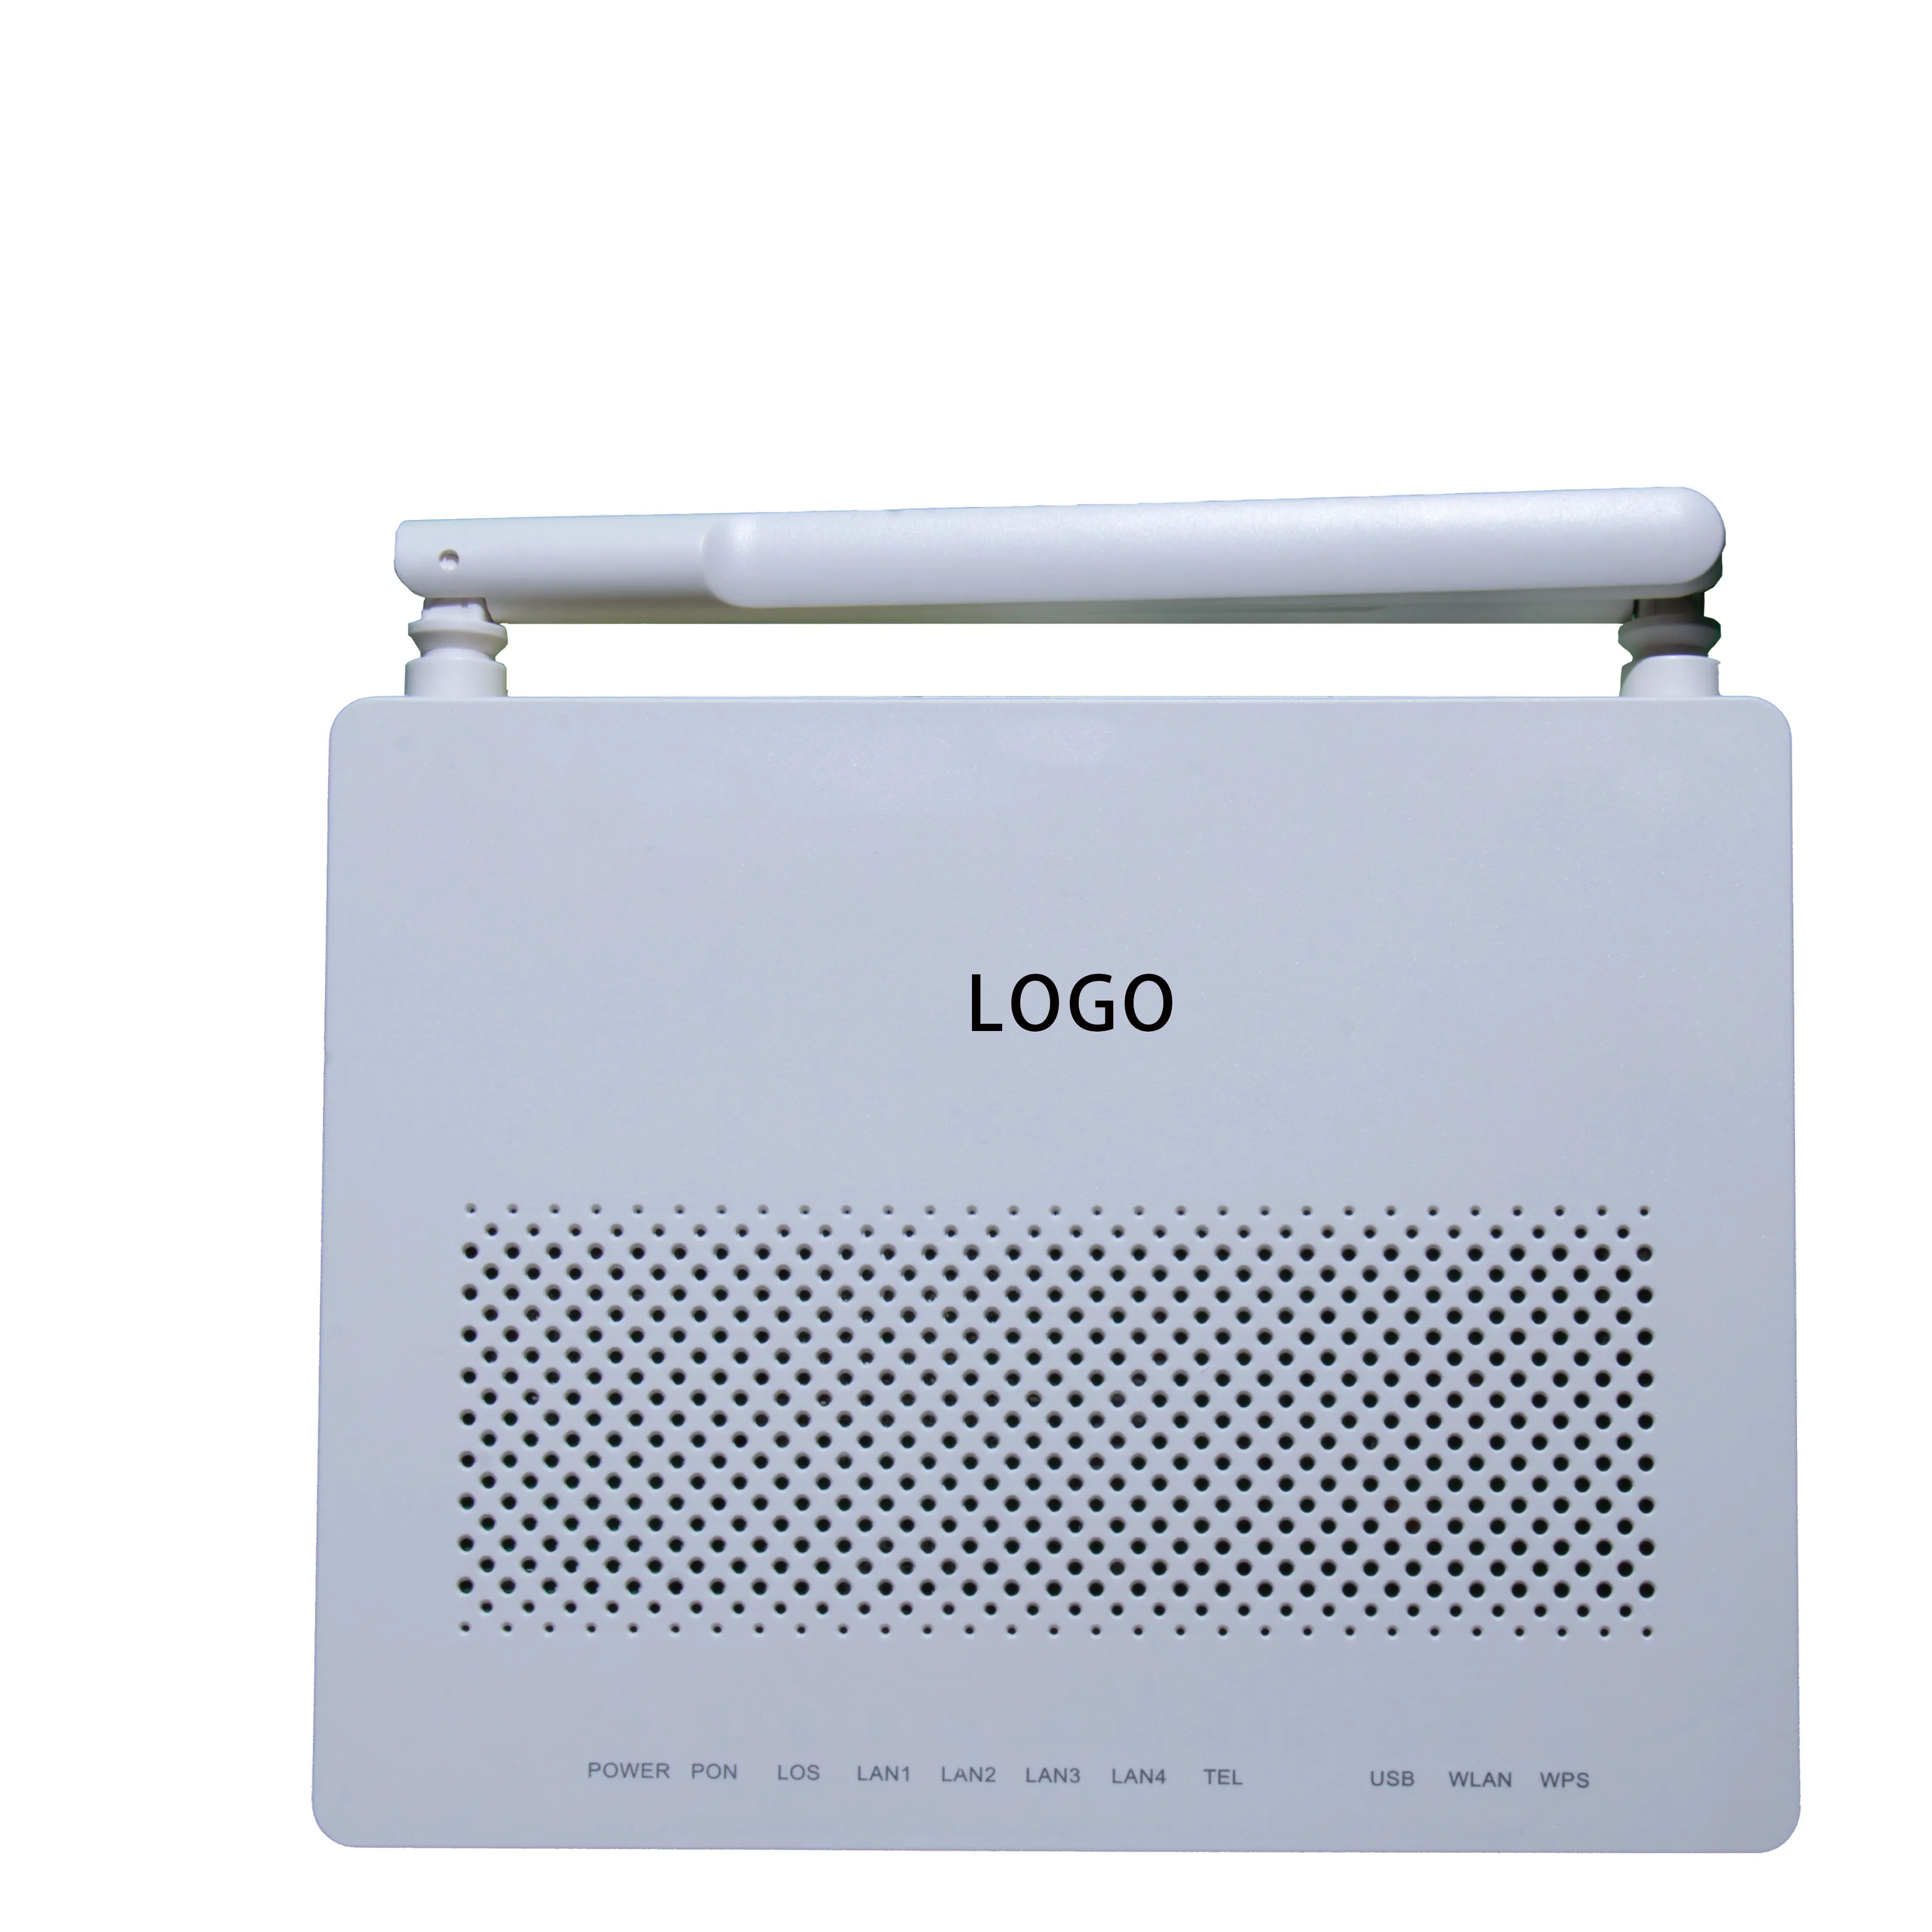 Brand New suitable for HG8546M GPON Xpon Onu Ont 1GE+3FE Huawei EG8141A5 Optic Fiber Router Modem With Customized Logo Printed